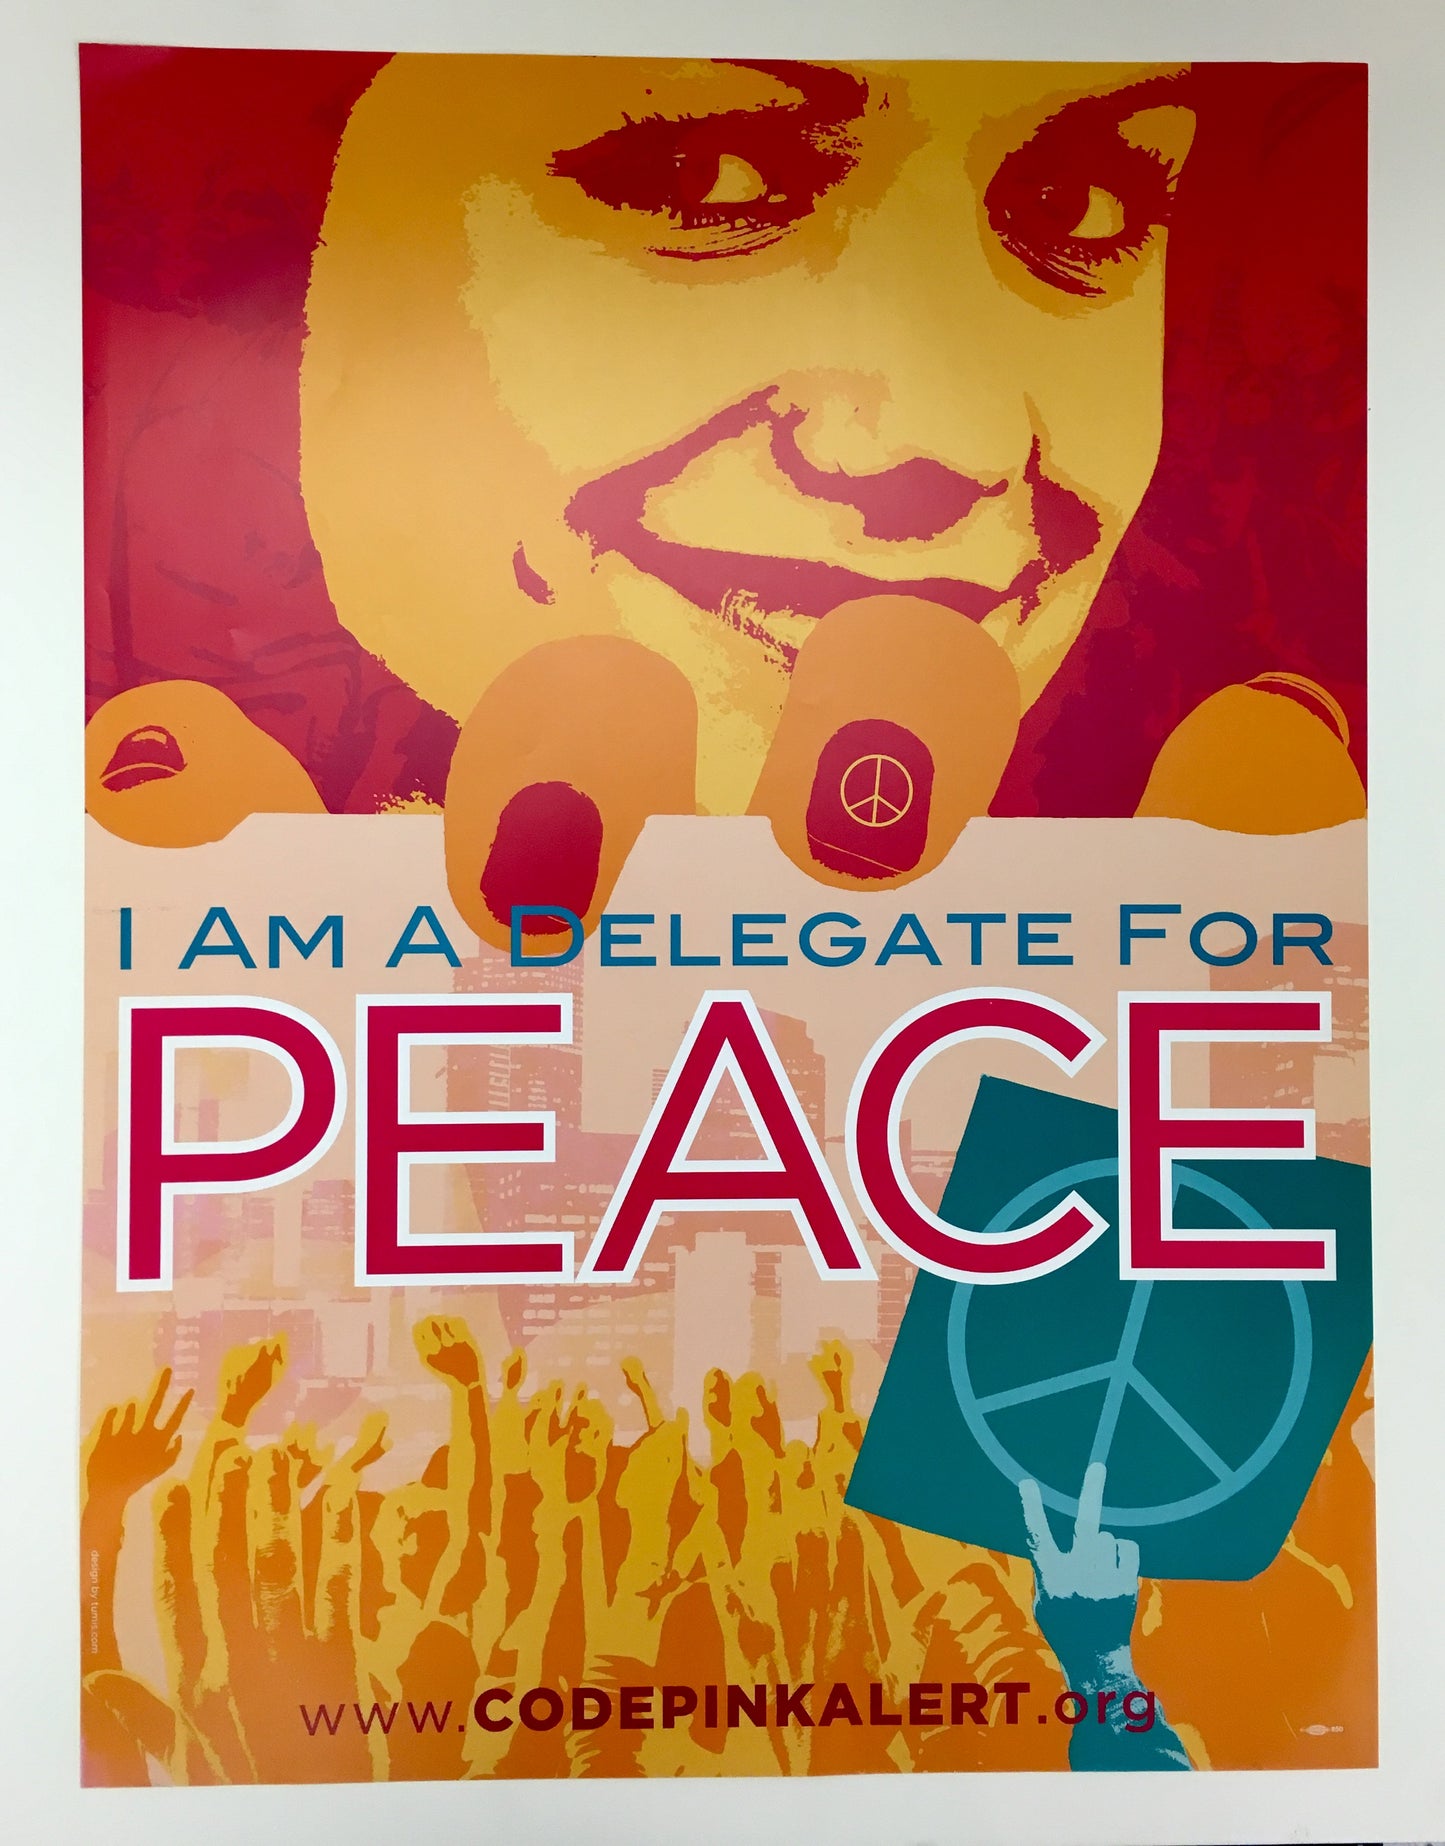 "I Am a Delegate for Peace" Poster - Code Pink.